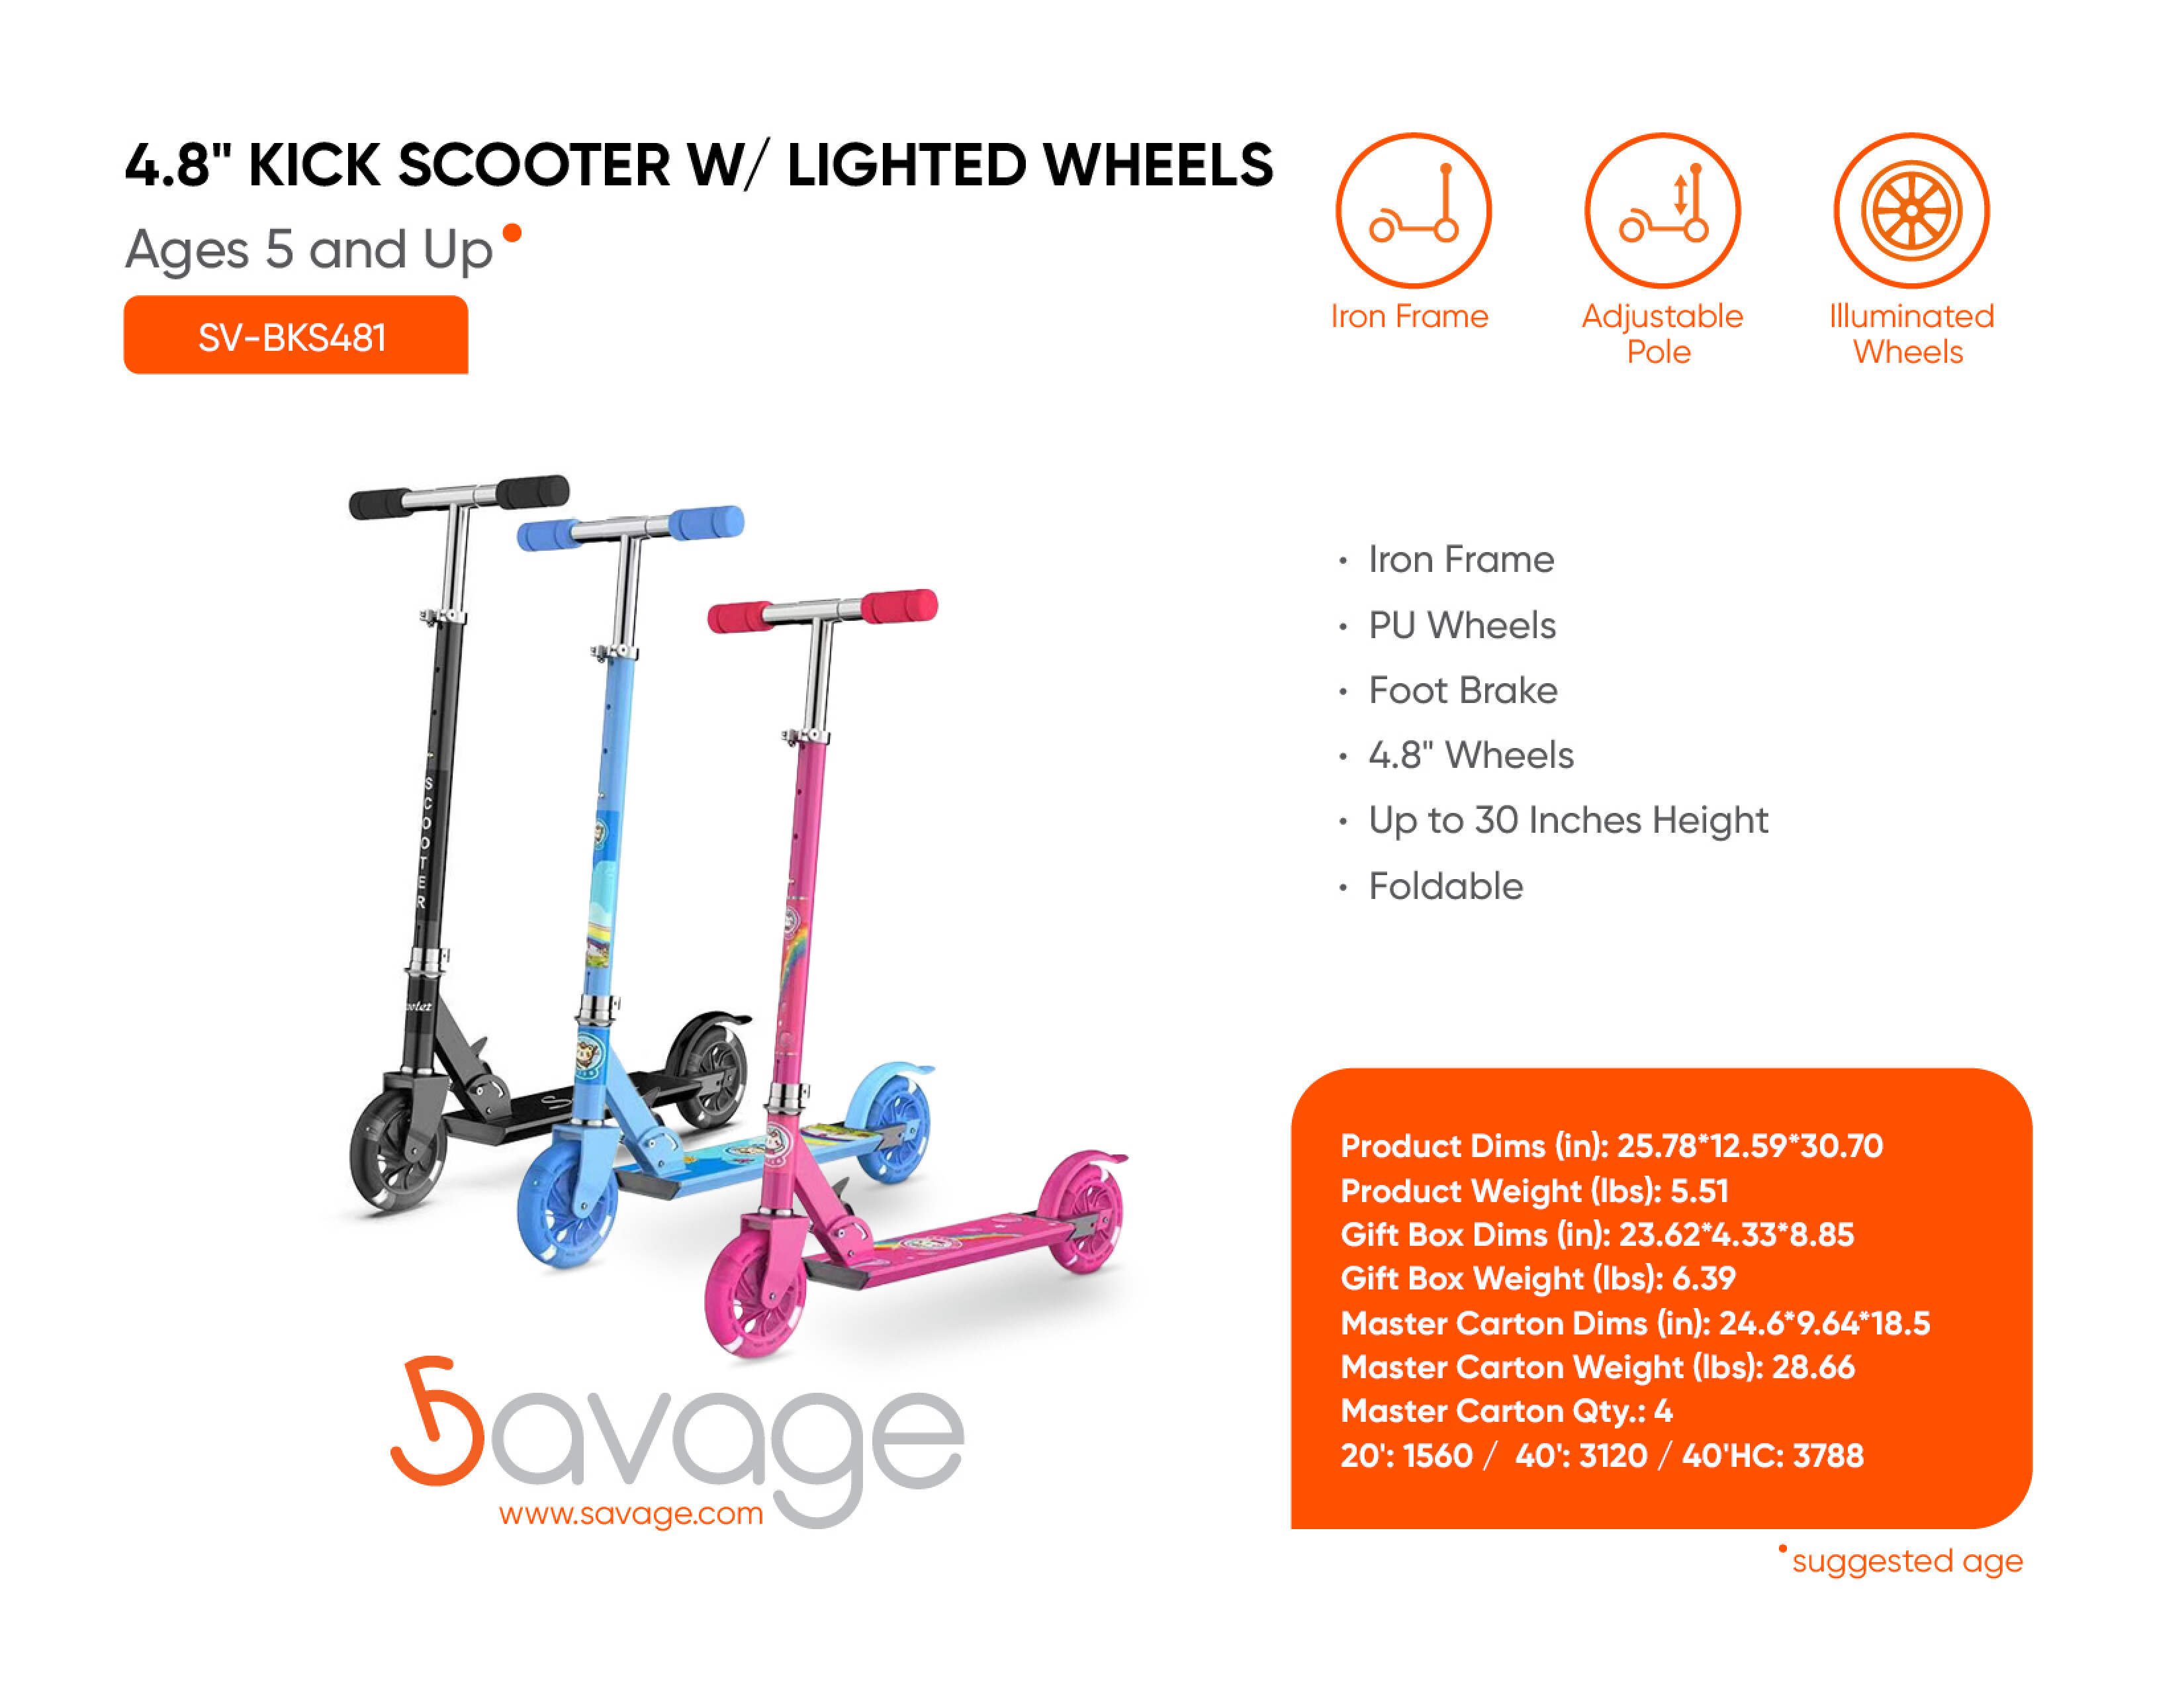 4.8 Kick Scooter W/Lighted Wheels